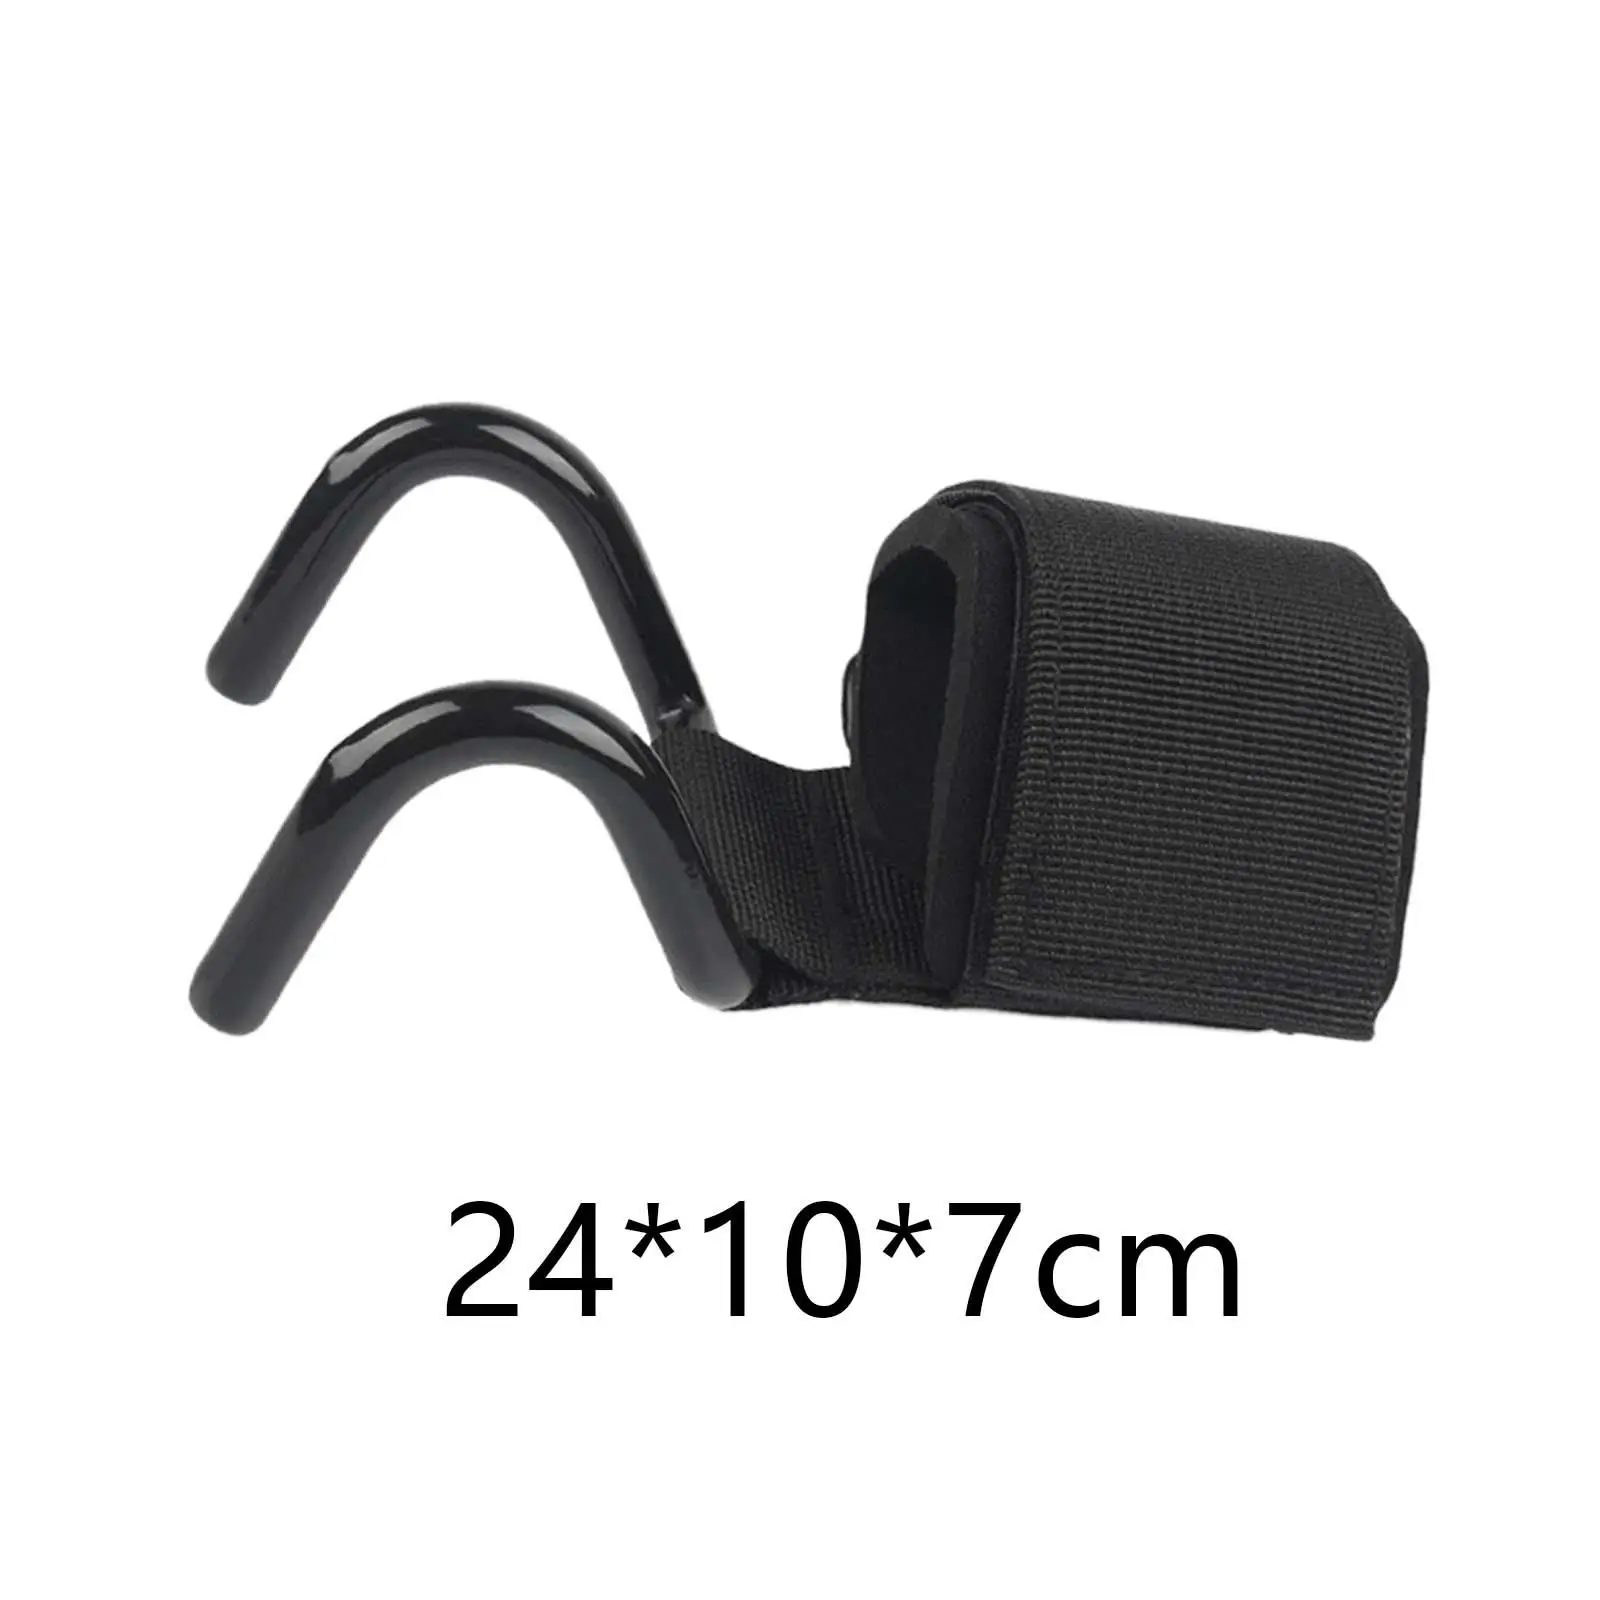 Weight Lifting Hooks Palm Protection Power Lifting Support Lifting Wrist Straps for Weightlifting Training Fitness Workout Women